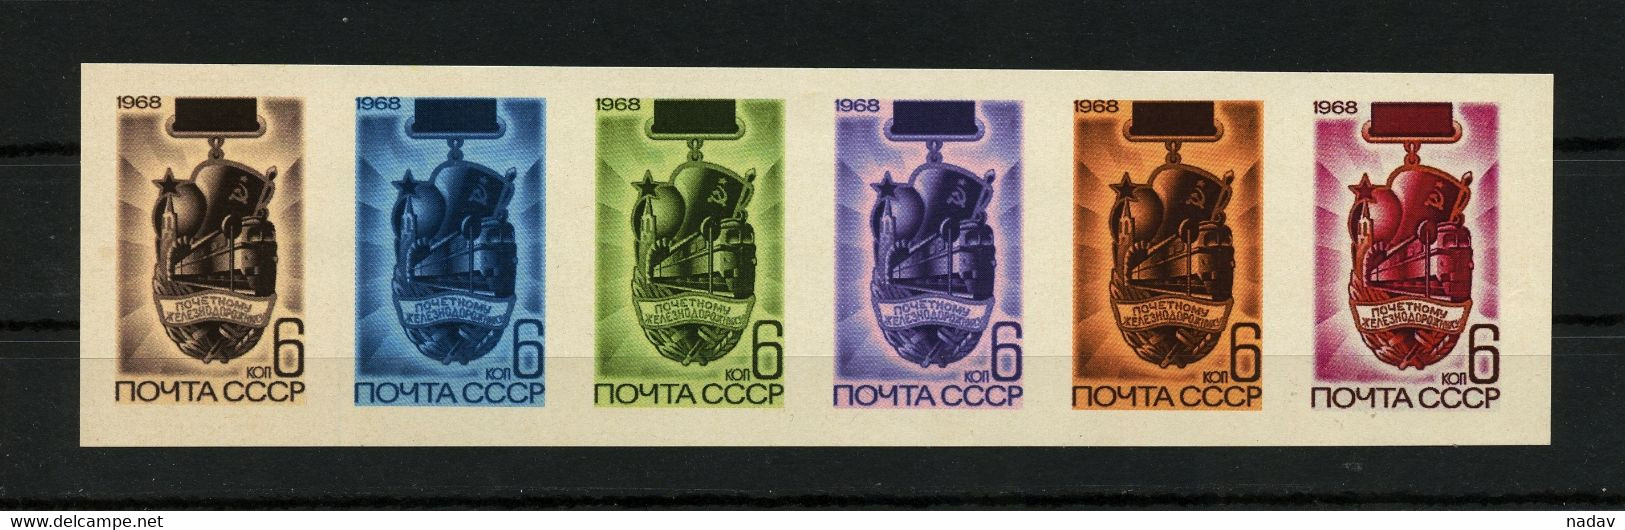 Russia & USSR-1968, Project -unreleased, Reproduction - MNH** - Proofs & Reprints